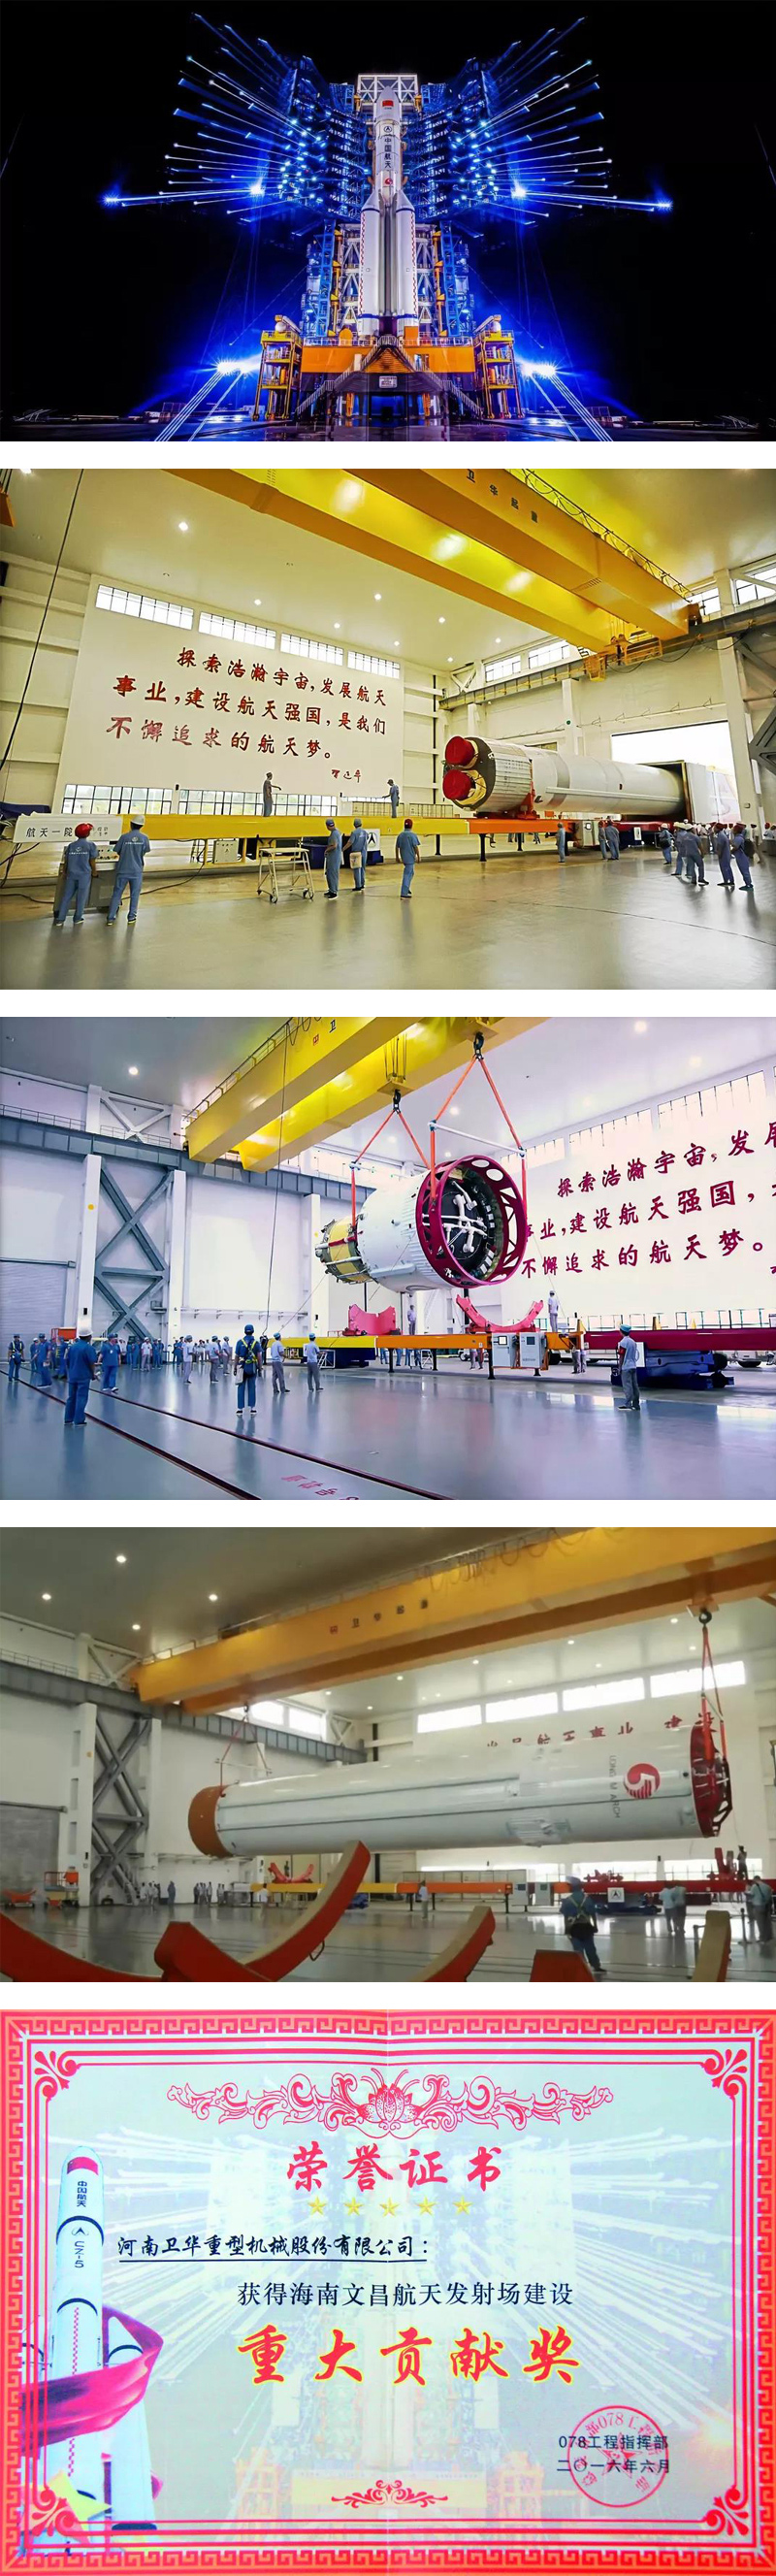 weihua-crane-for-rocket-assembly(1)